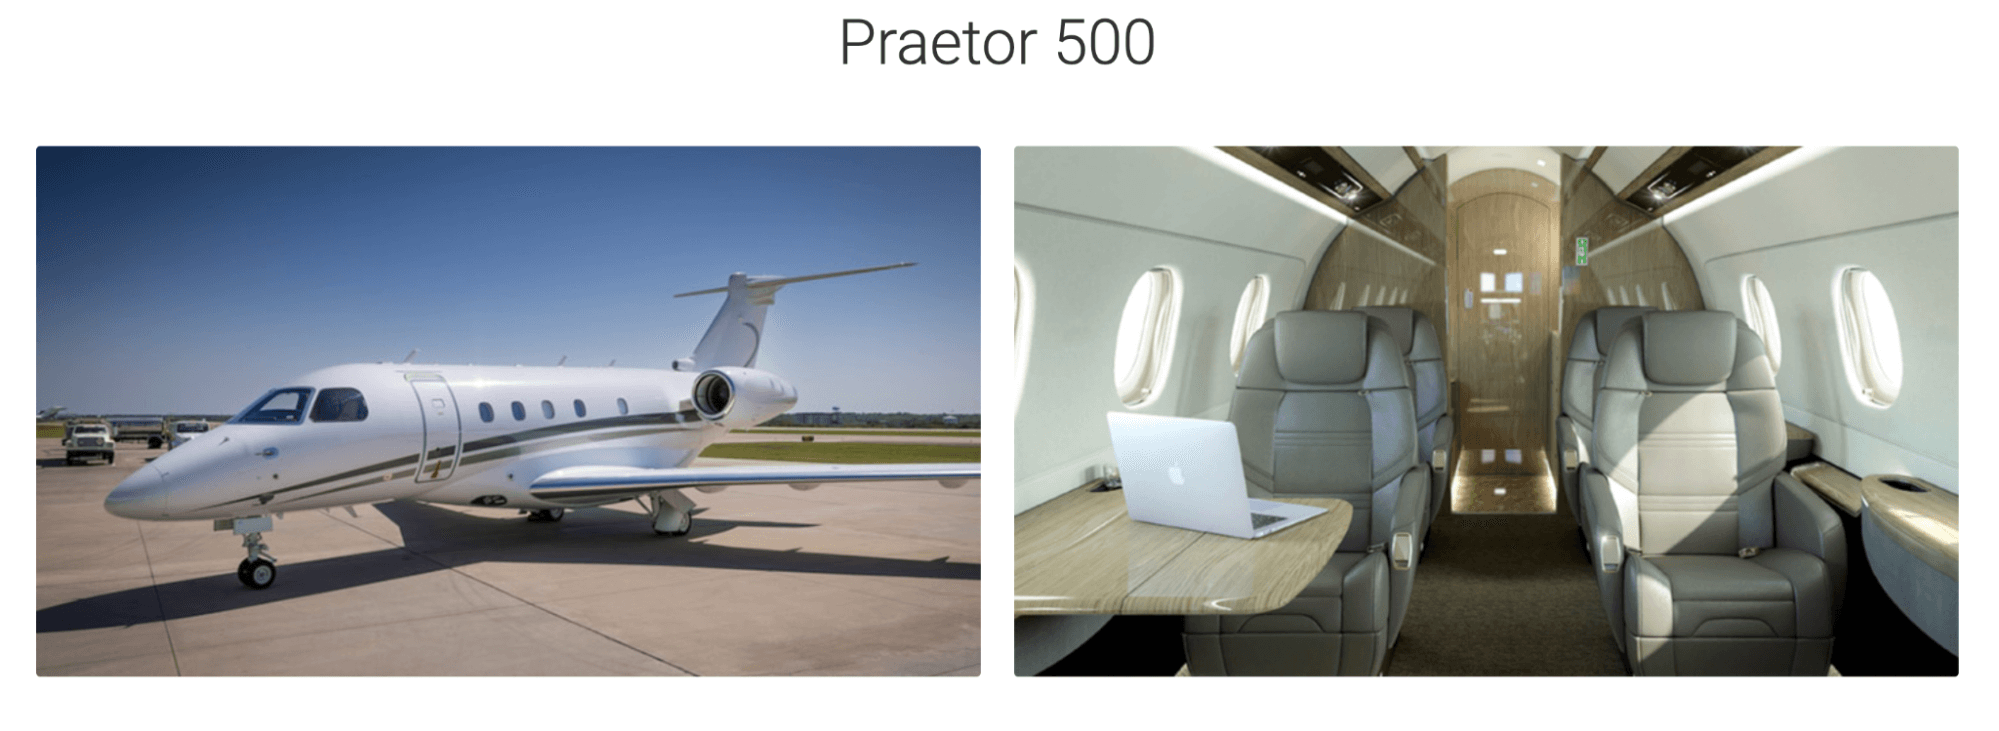 An exterior and interior picture of the corporate jet Praetor 500.